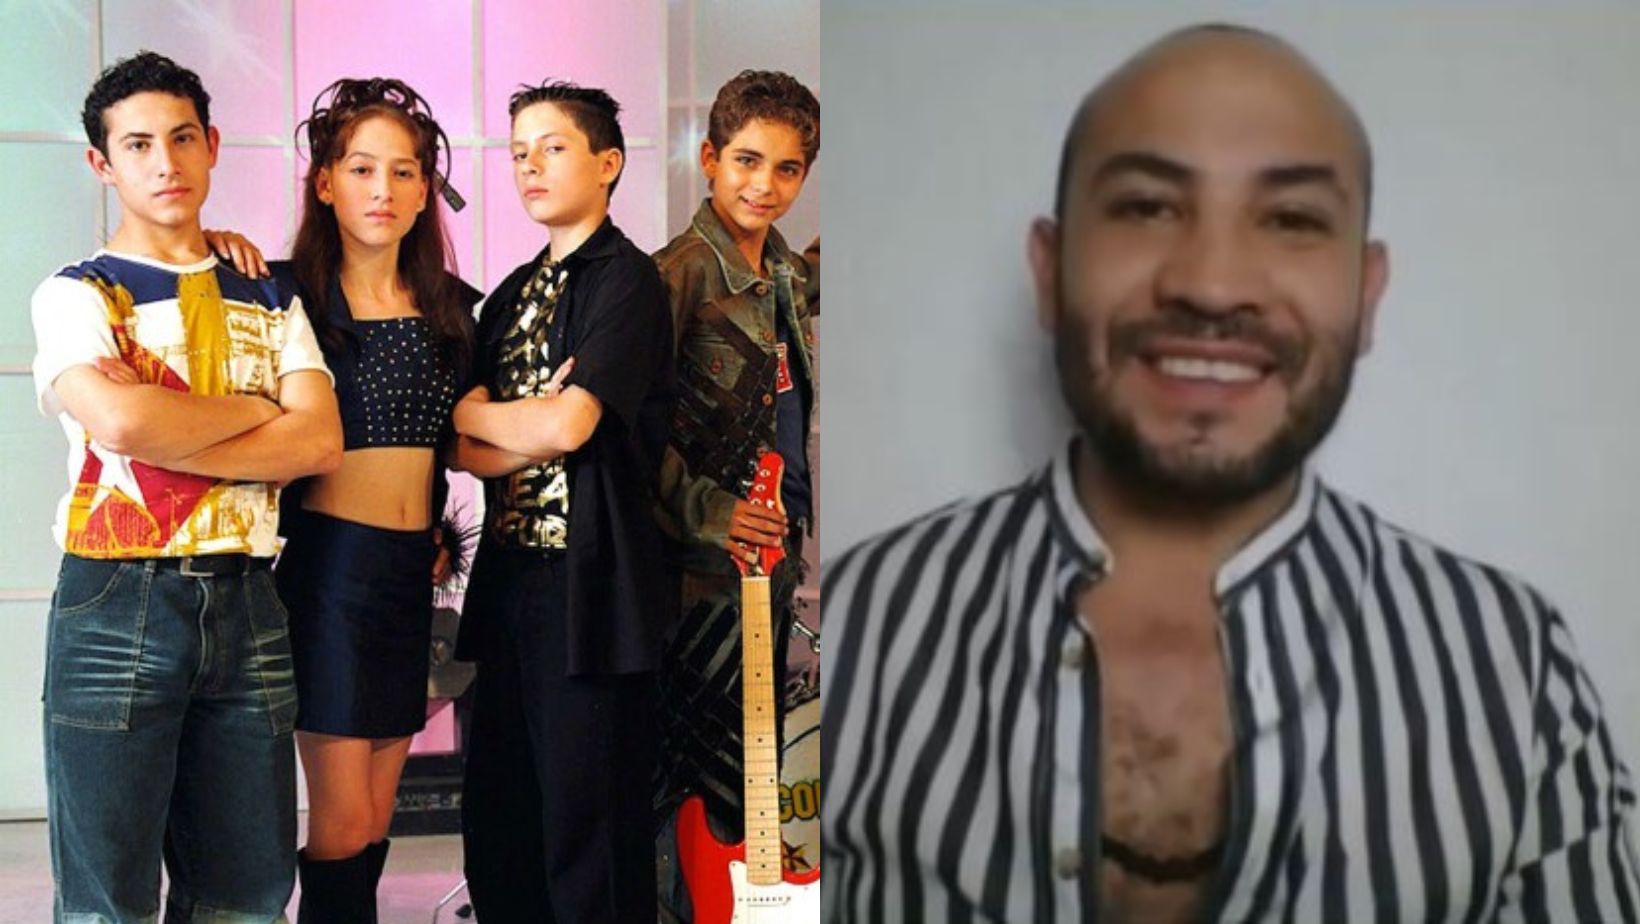 Exactor of children's soap operas, Mickey Santana was singled out for his alleged participation in the disappearance of young Ana Victoria.  (Special)